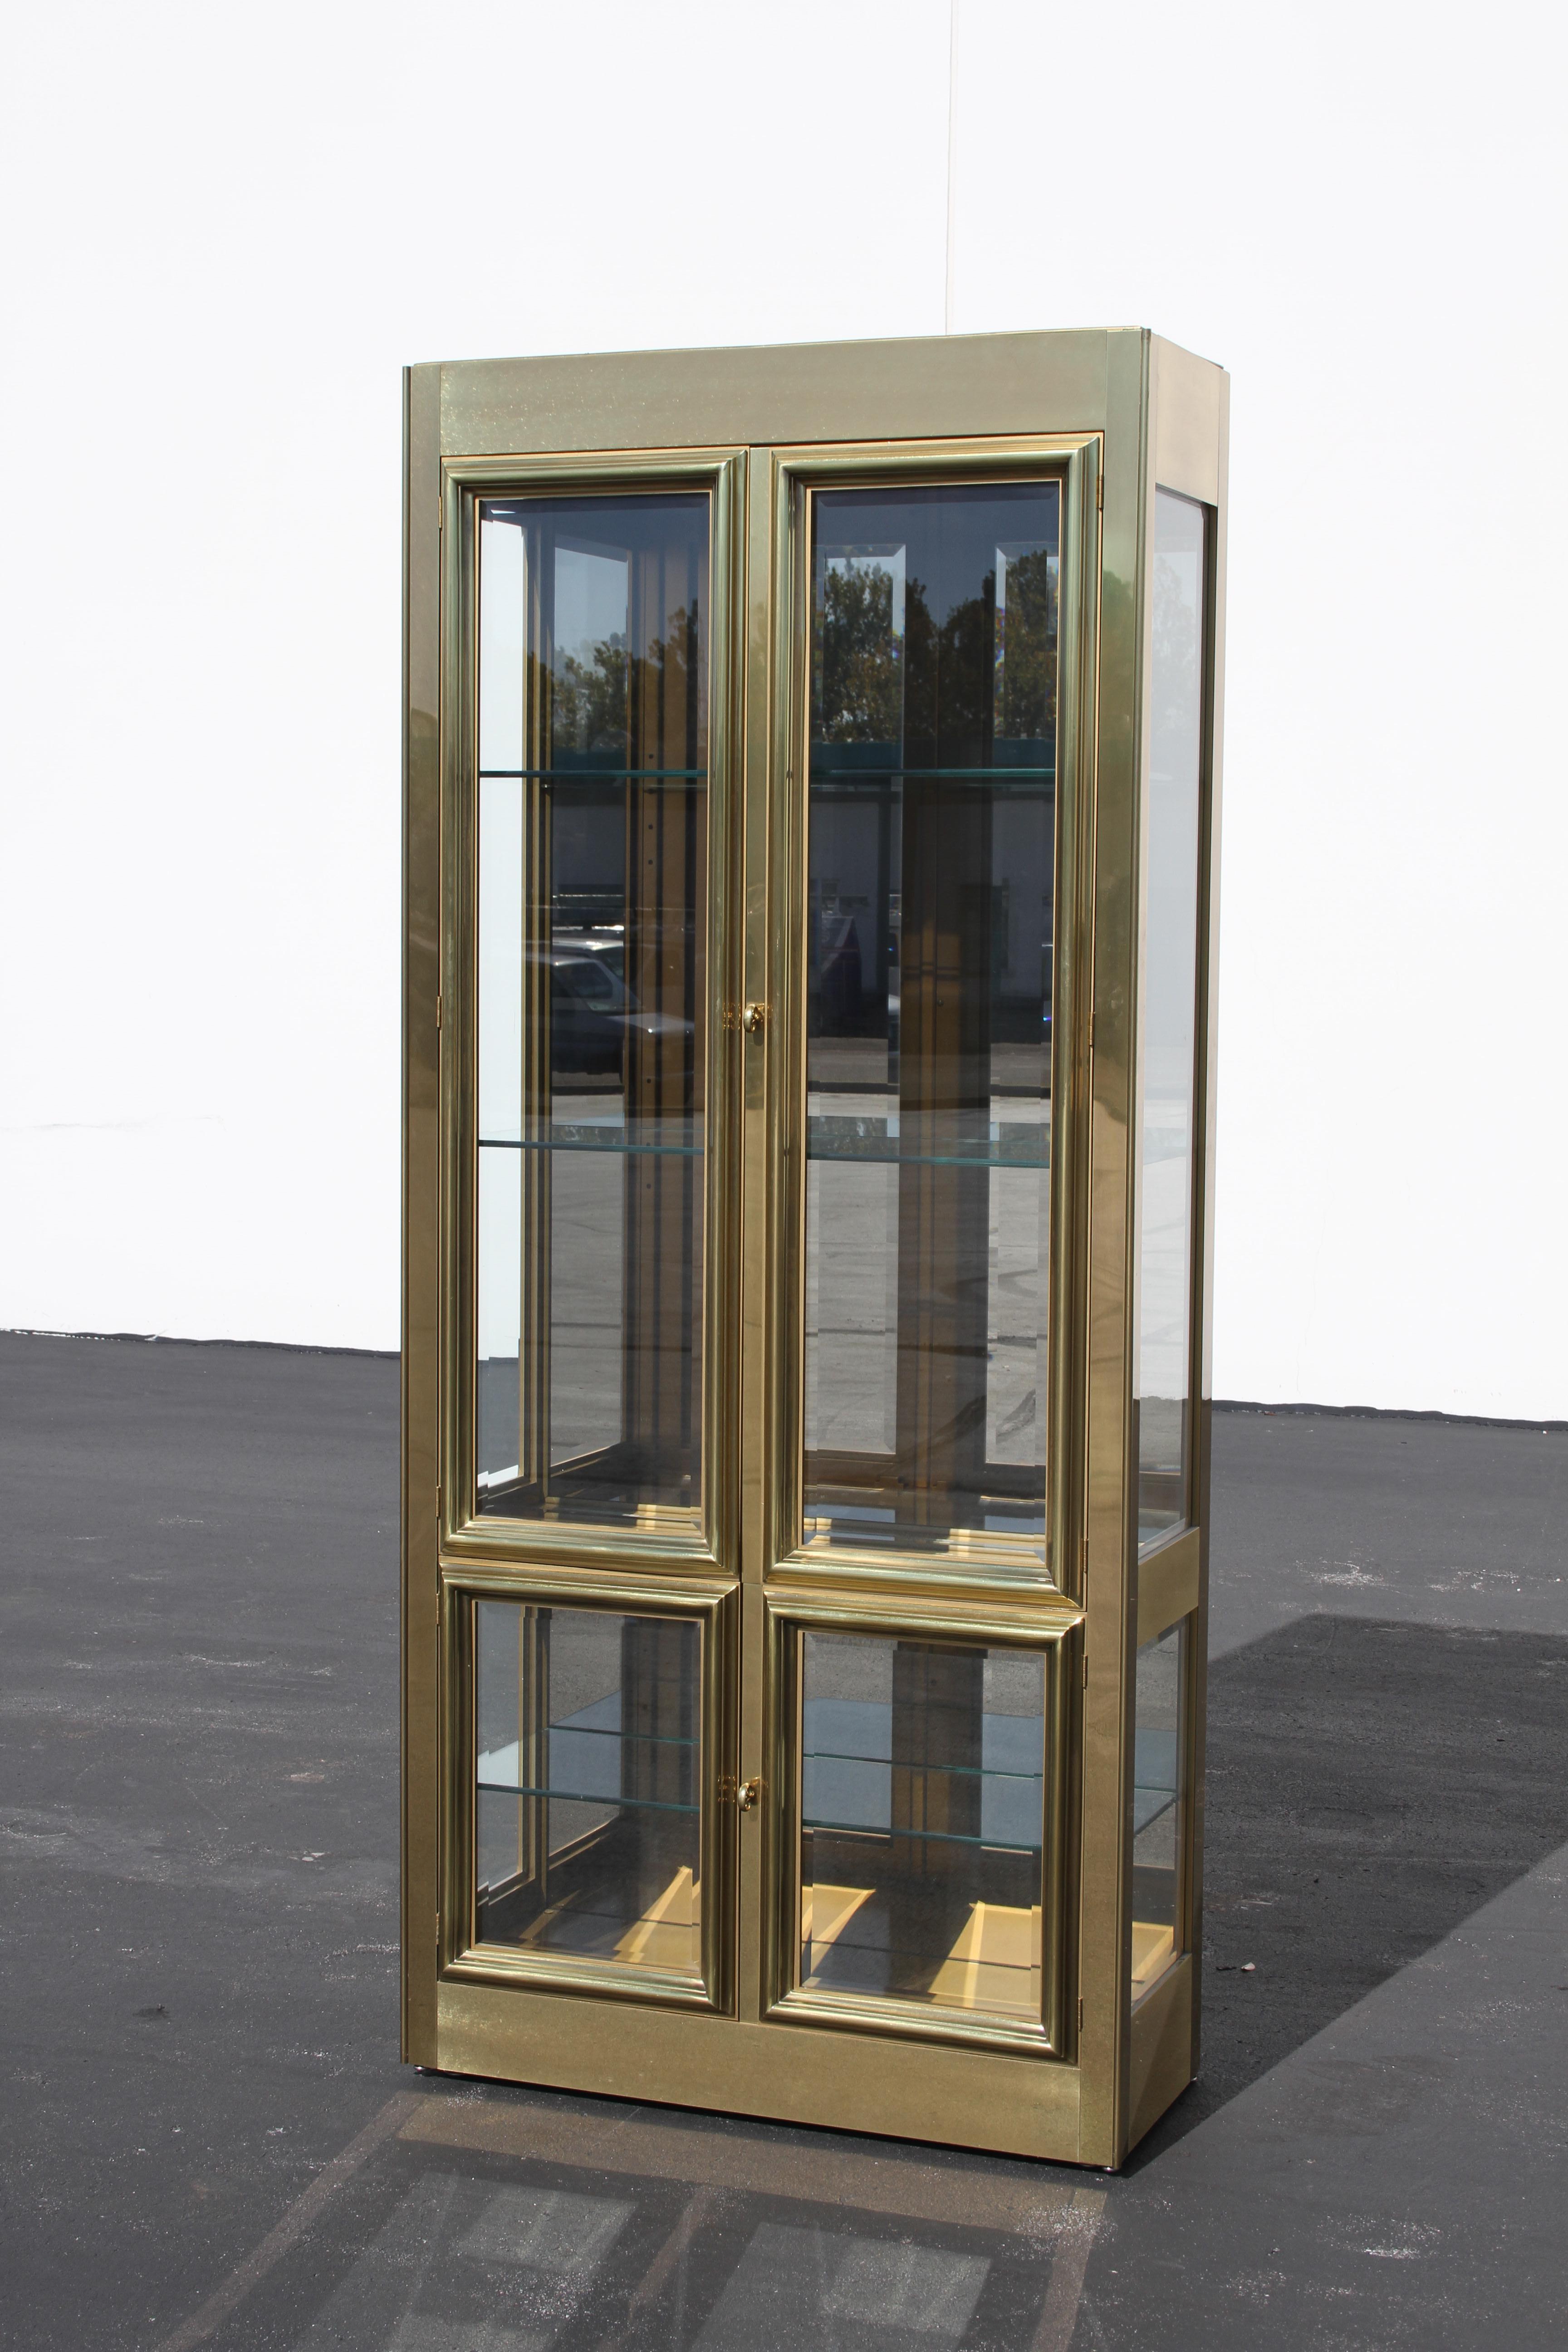 Mastercraft brass display or Vitrine with four beveled glass doors, design is circa 1970s, this was manufactured in the 1980s. Has three adjustable glass shelves and mirrored backing. Ceiling has two internal lights, switch and cord. Upper case with